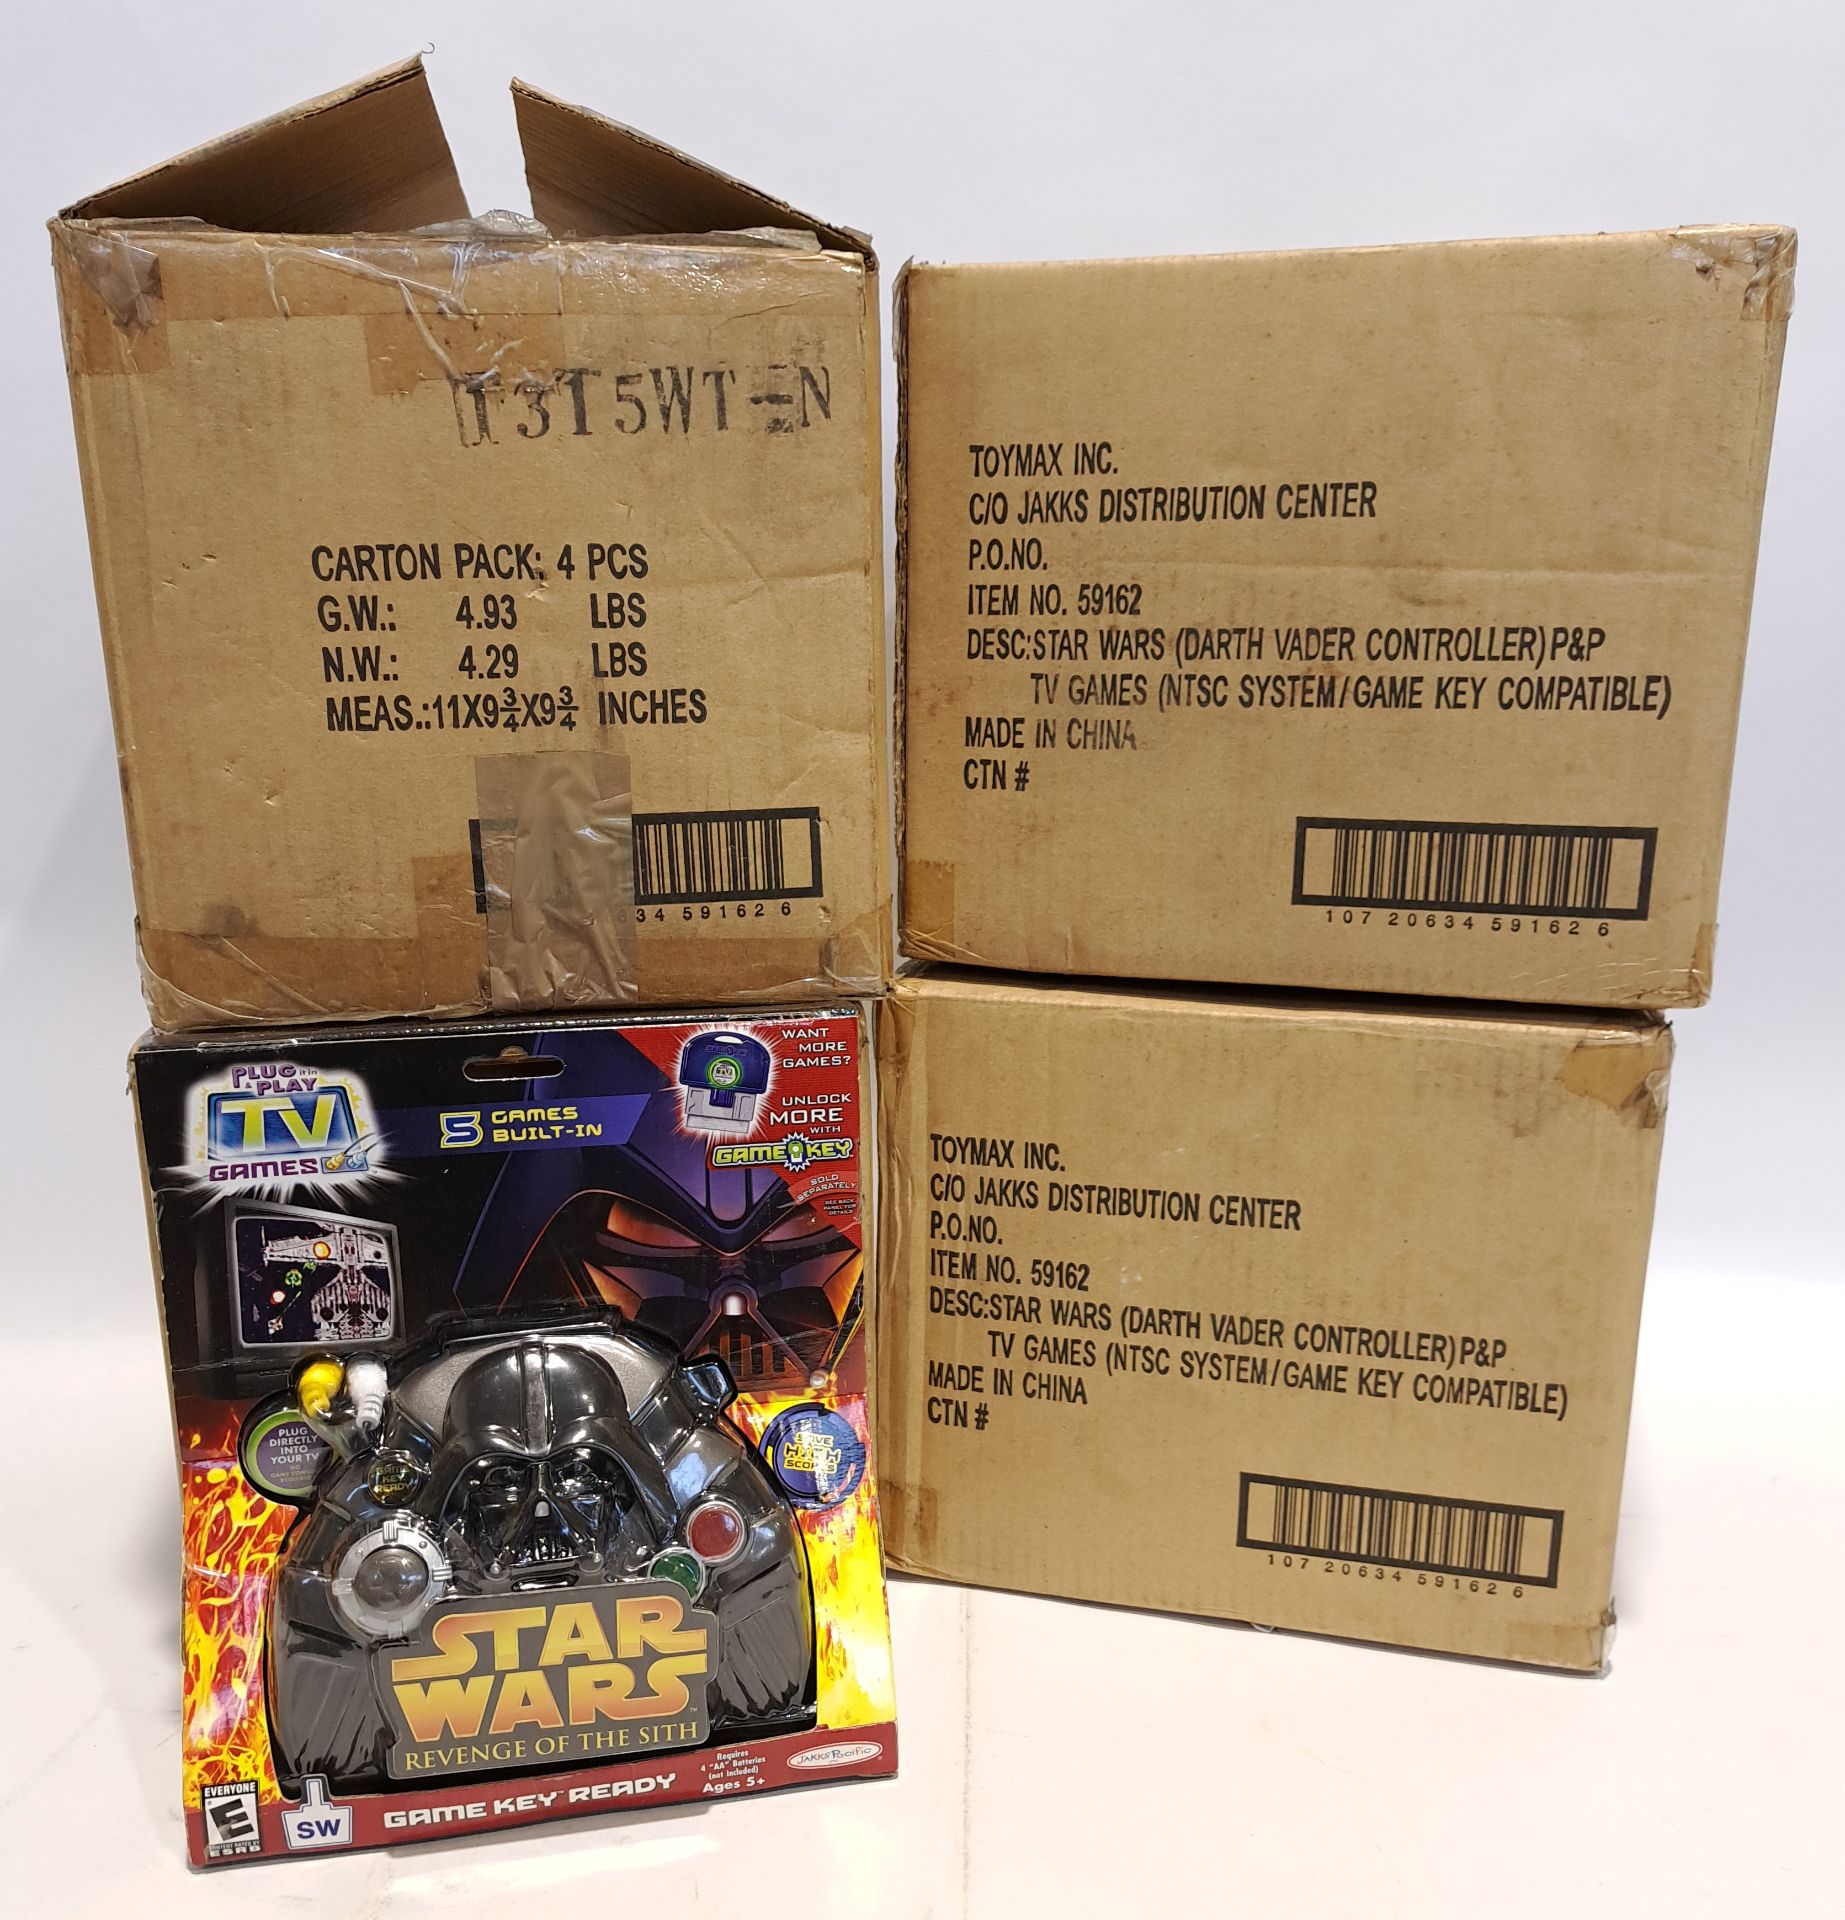 Quantity of Jakks Pacific Star Wars Plug In Play Controllers